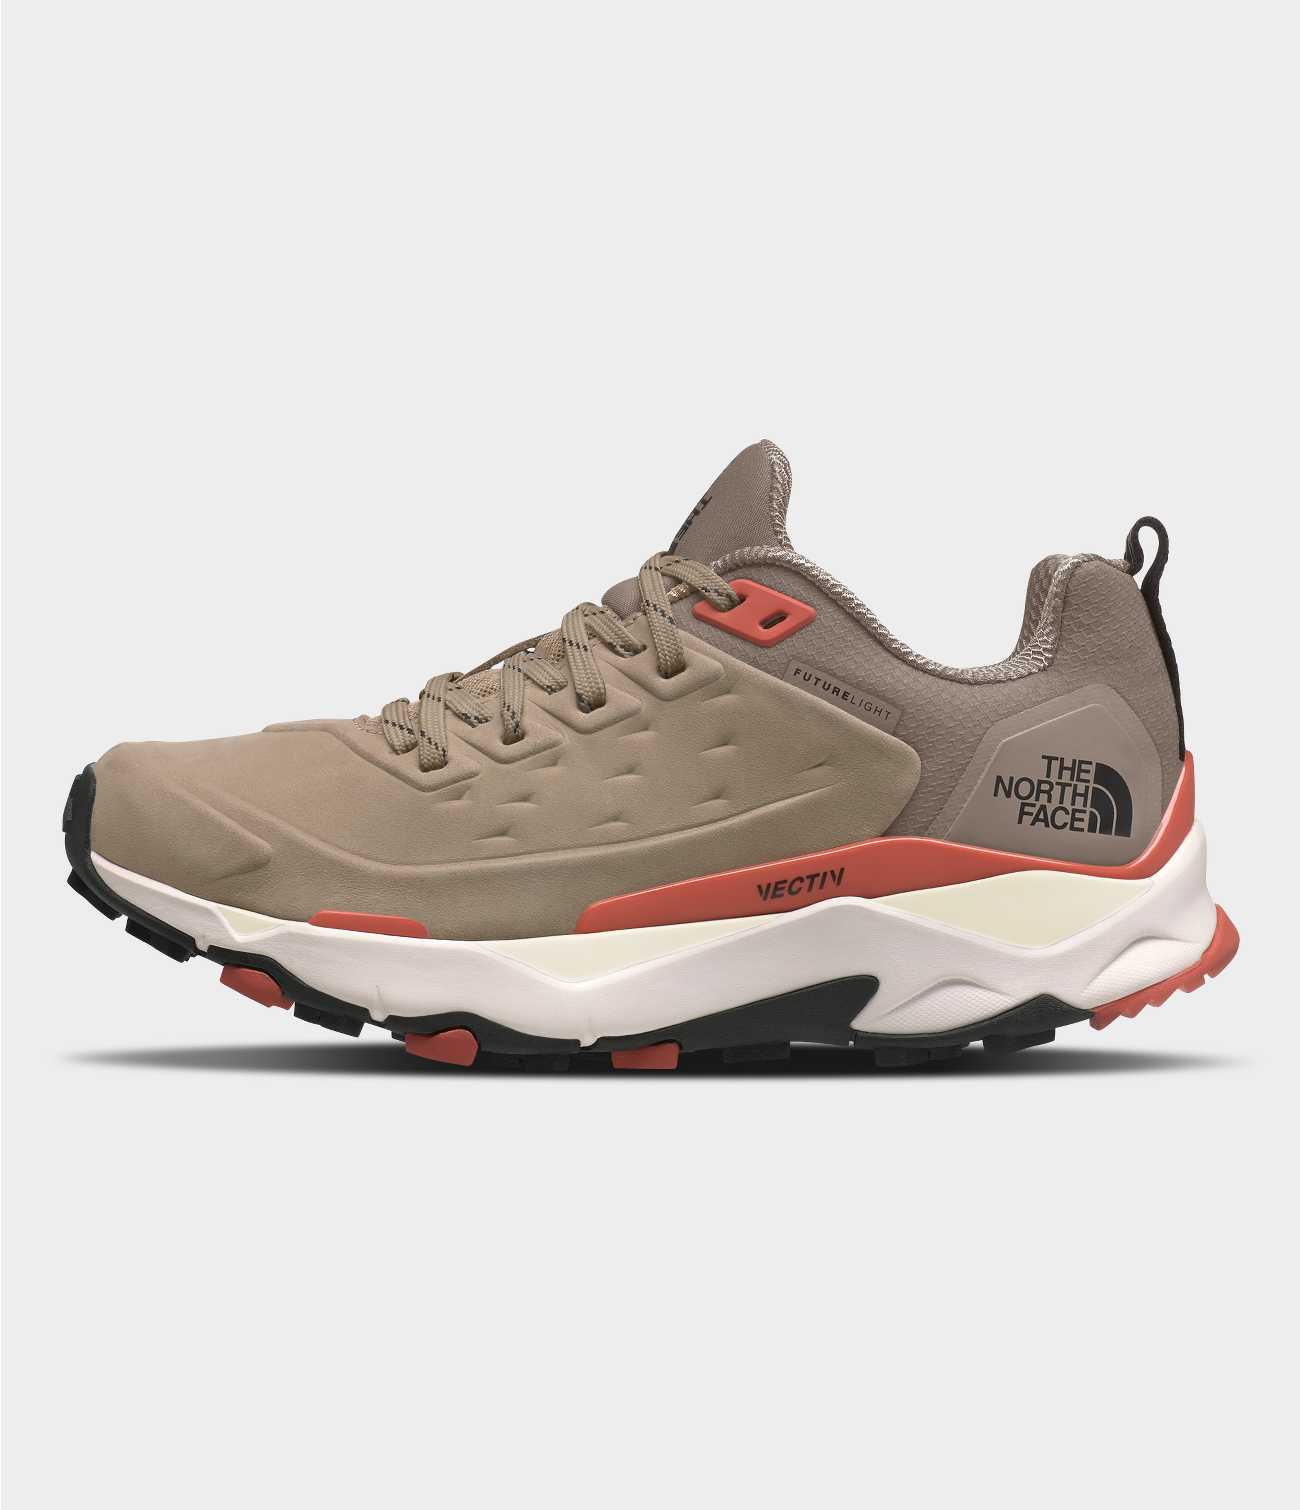 The North Face Renewed - WOMEN'S VECTIV™ FASTPACK FUTURELIGHT™ SHOES